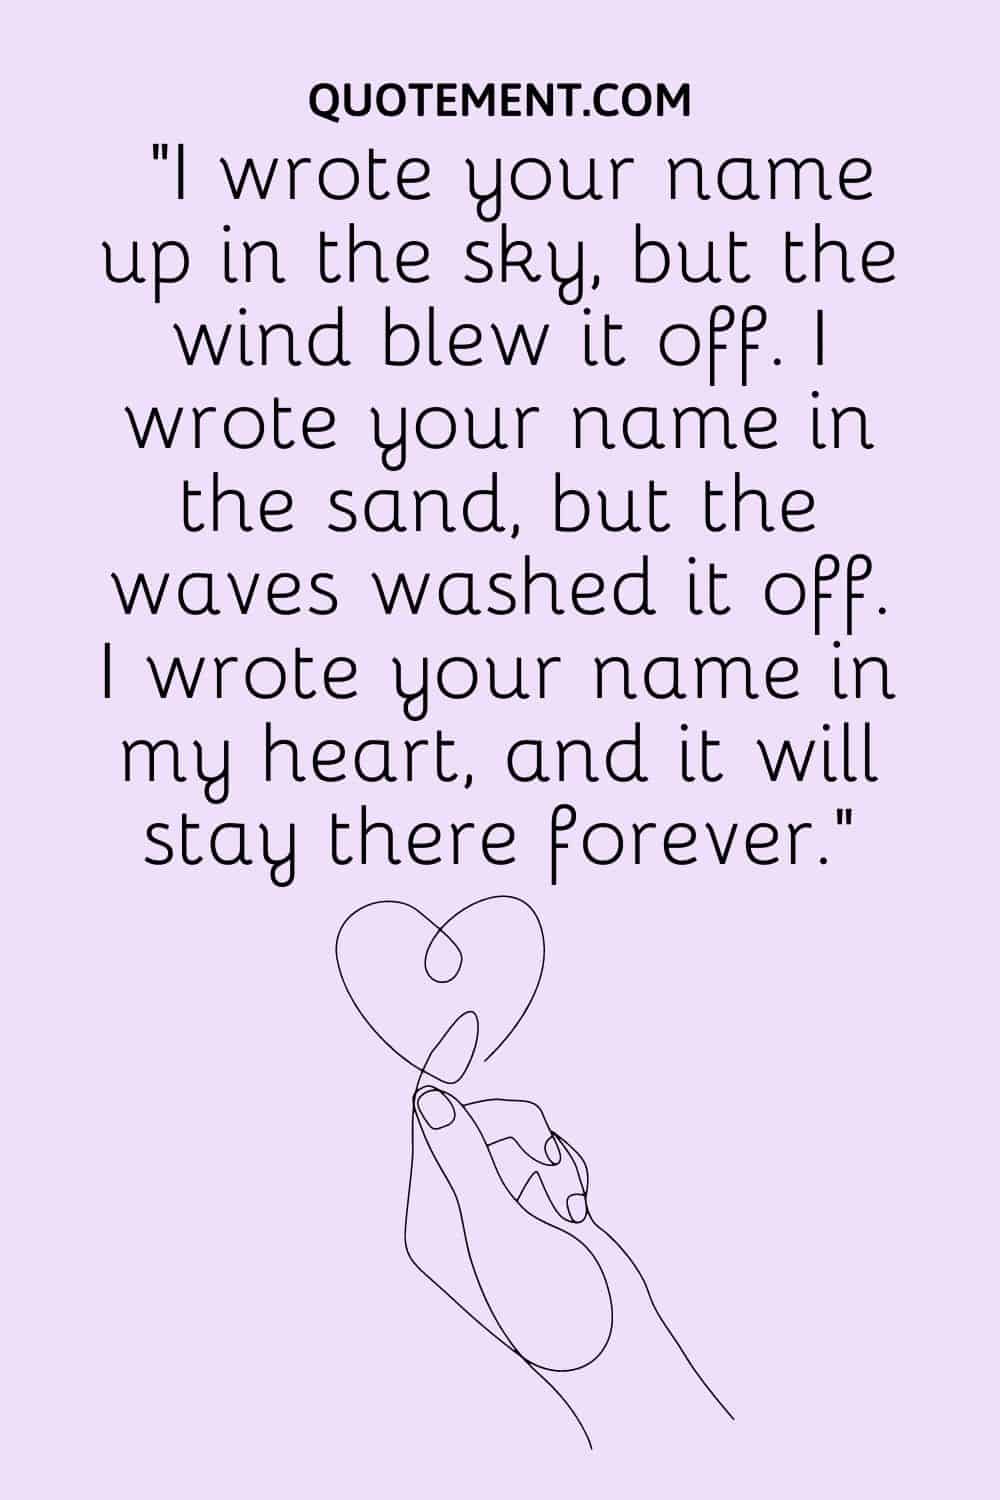 I wrote your name up in the sky, but the wind blew it off.